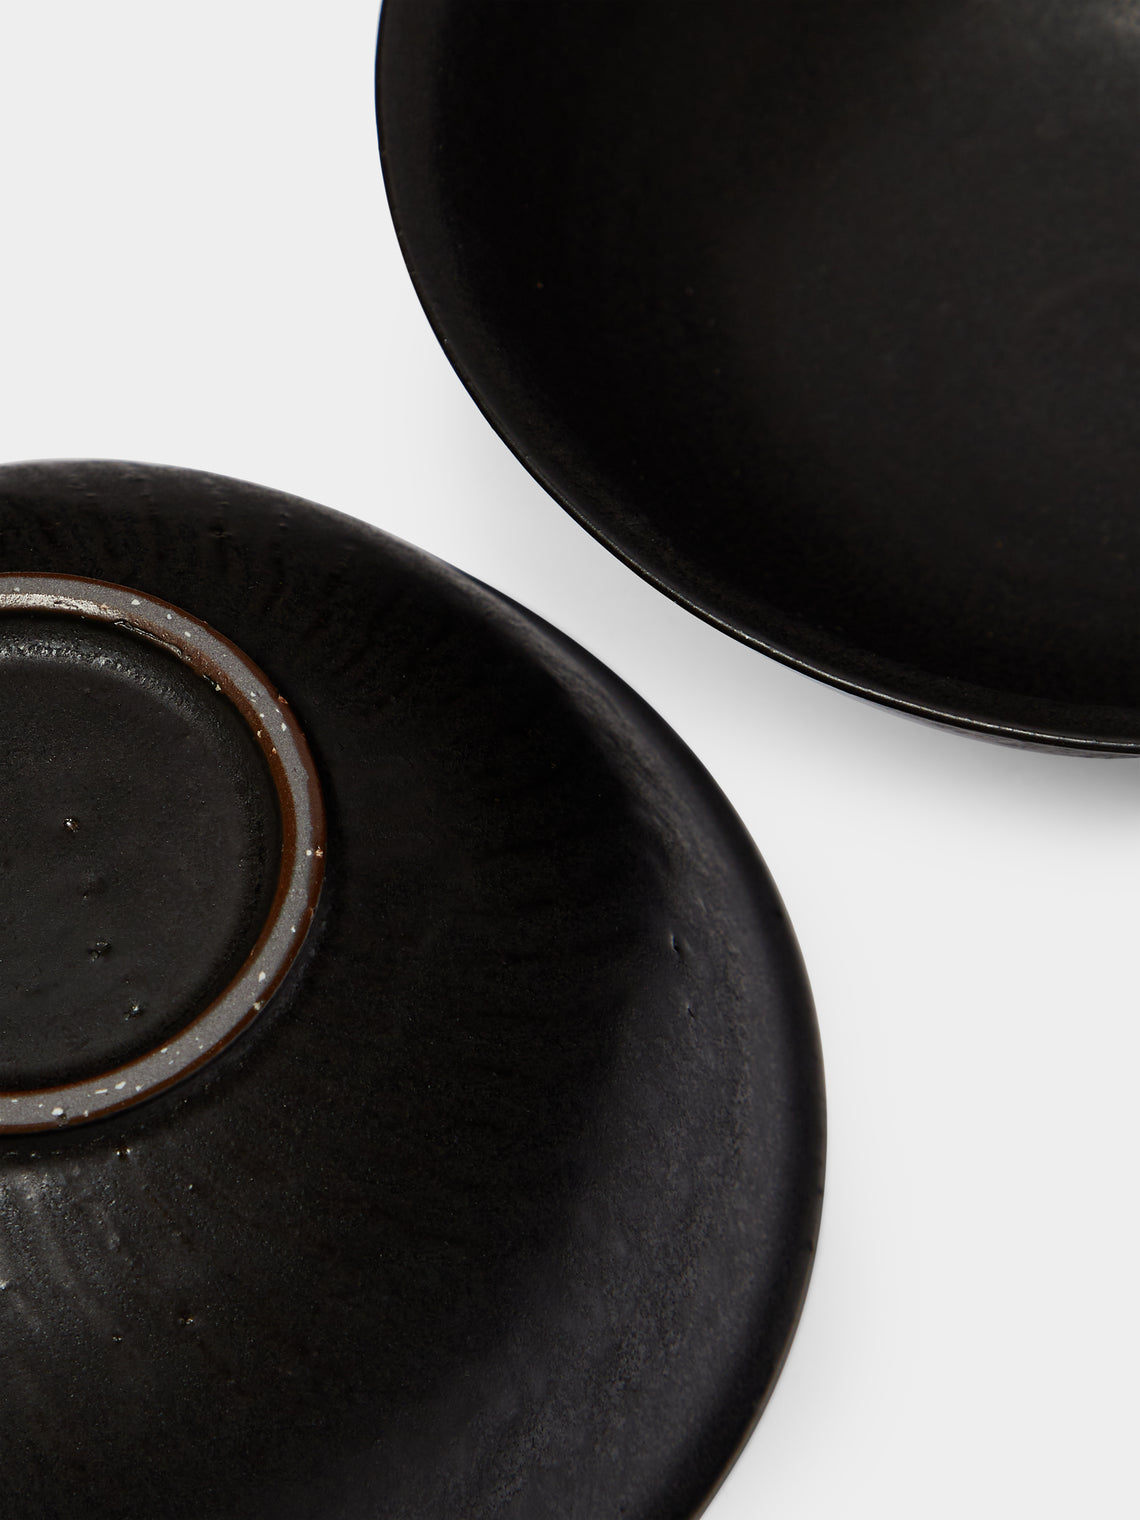 Lee Song-am - Black Clay Bowls (Set of 4) -  - ABASK